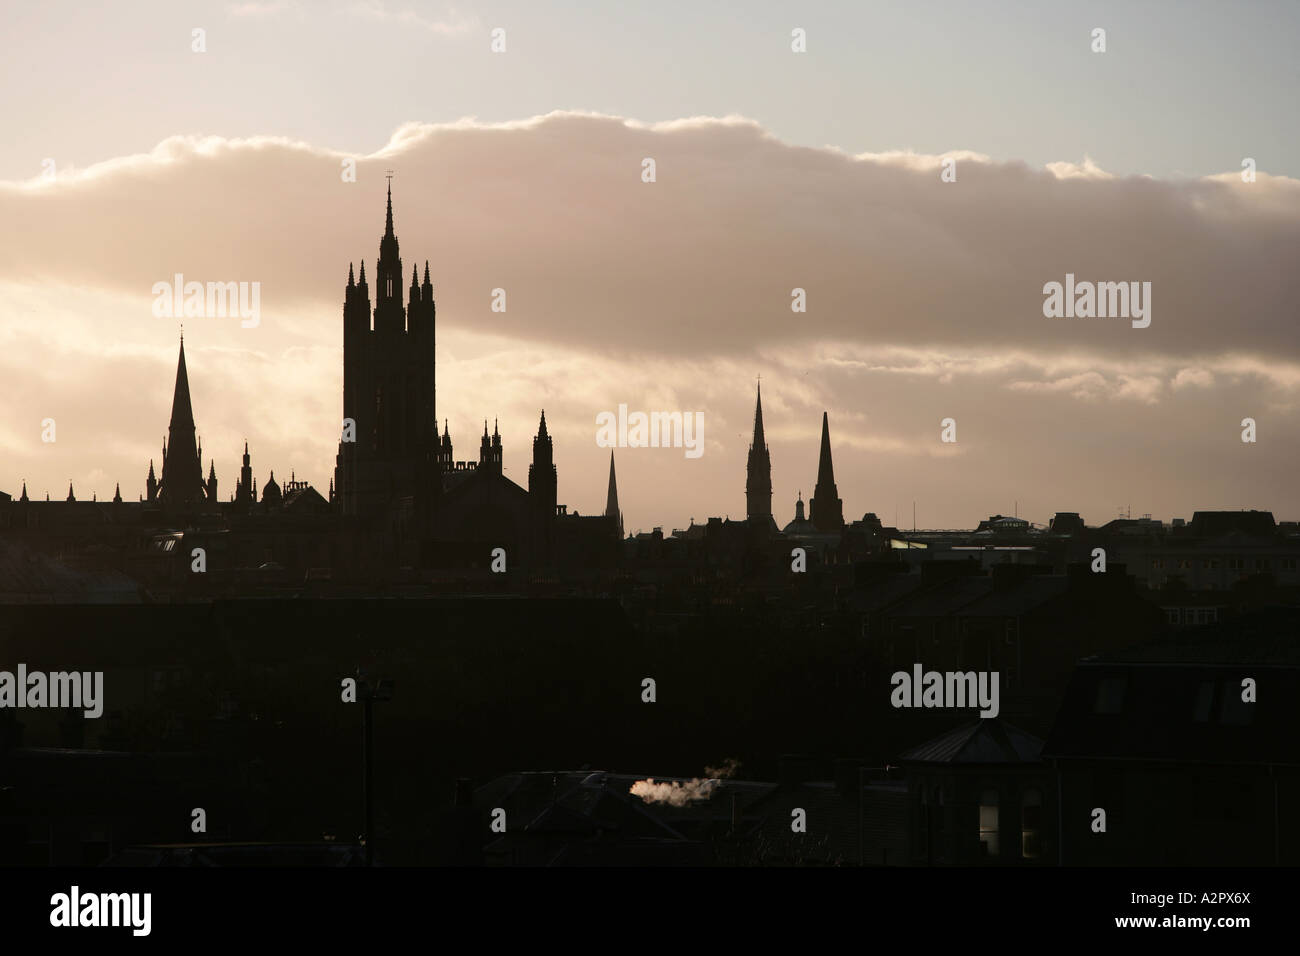 Aberdeen city, Scotland skyline at dusk with church cathedral spire silhouetted against warm sky Stock Photo